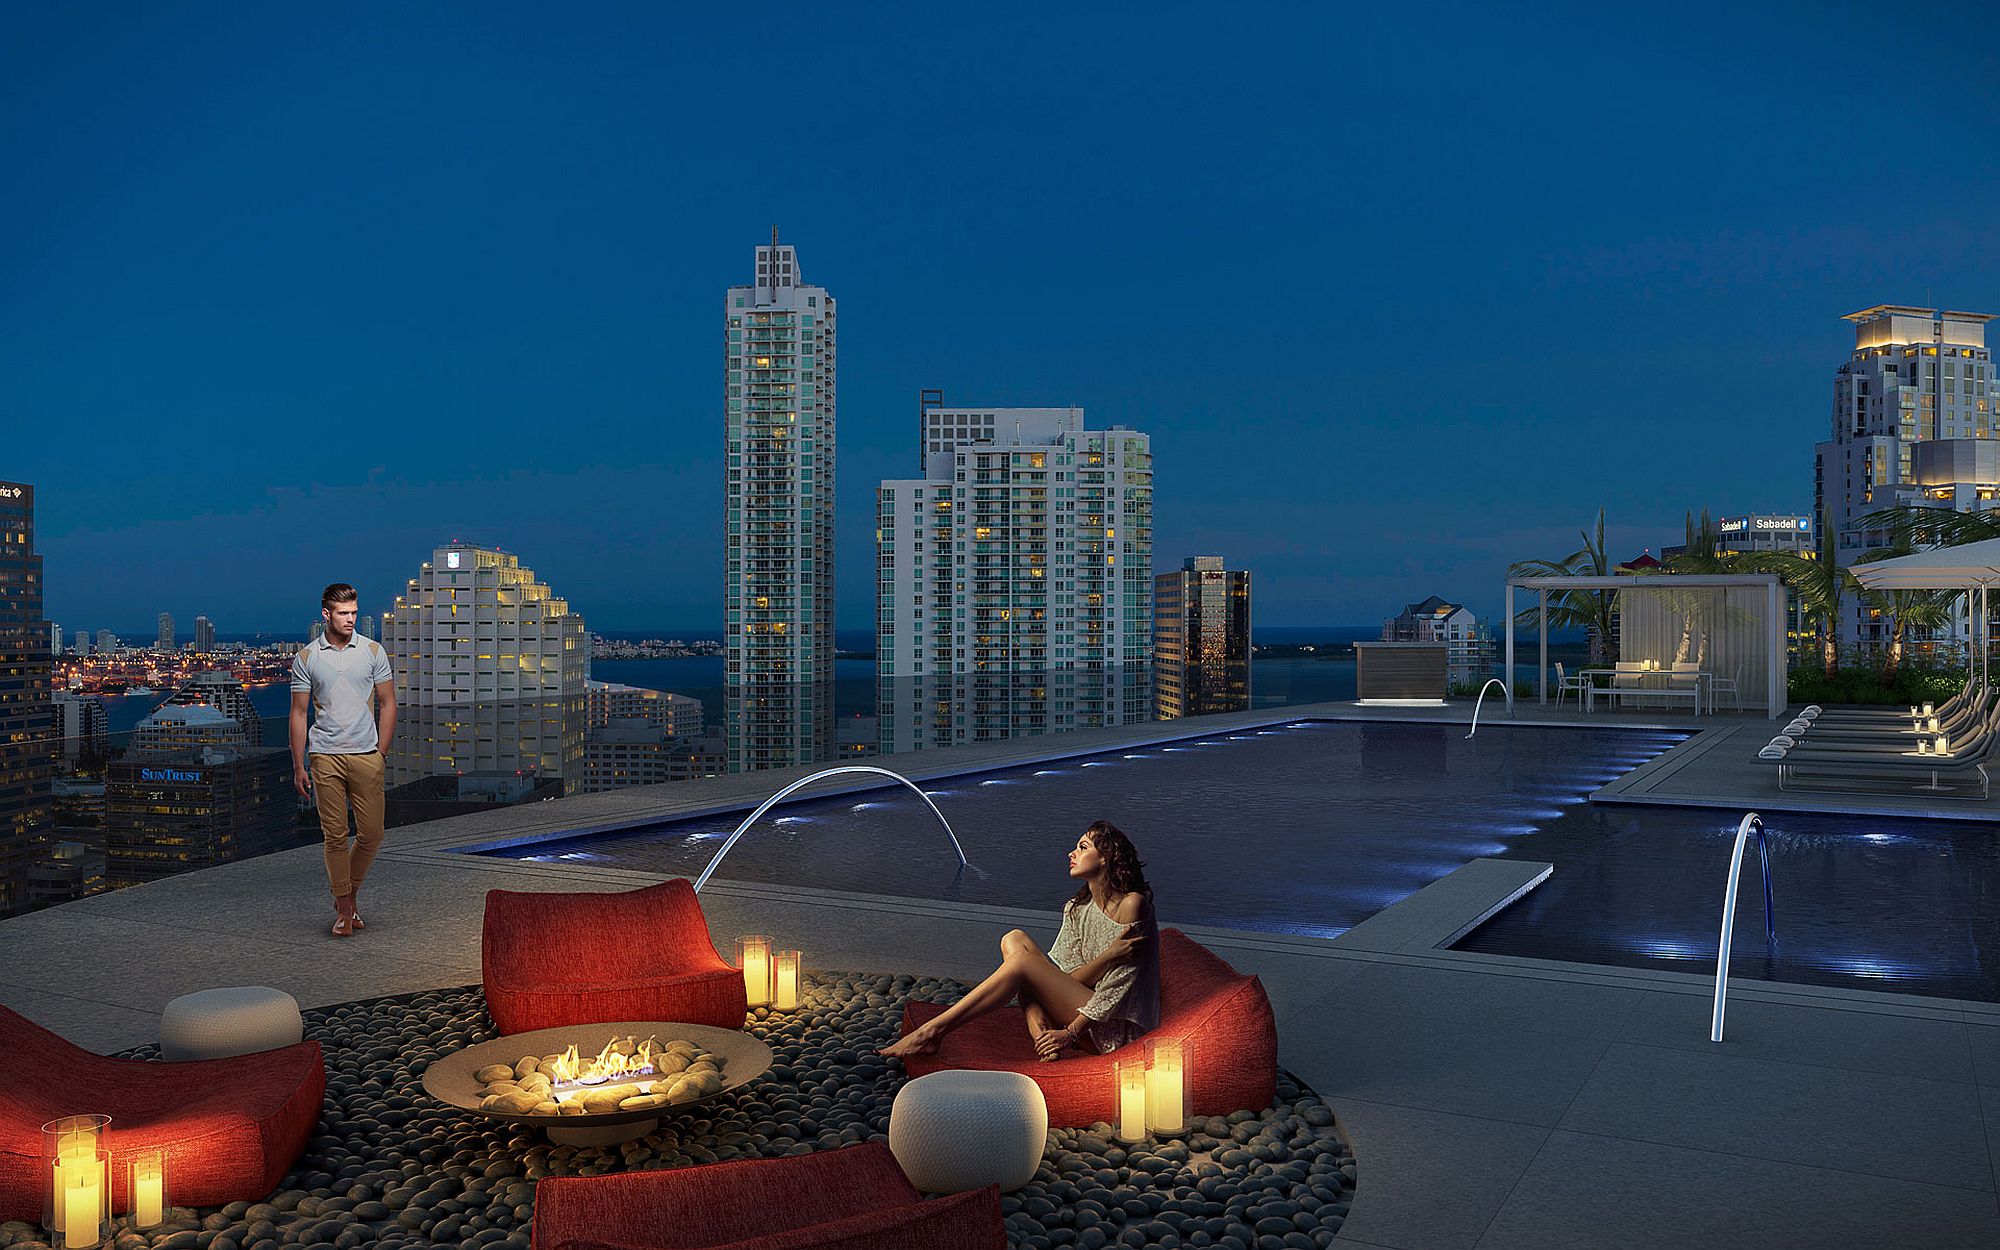 Rooftop pool and hangout at Brickell Heights transports you into a dreamy, vacation-style setting